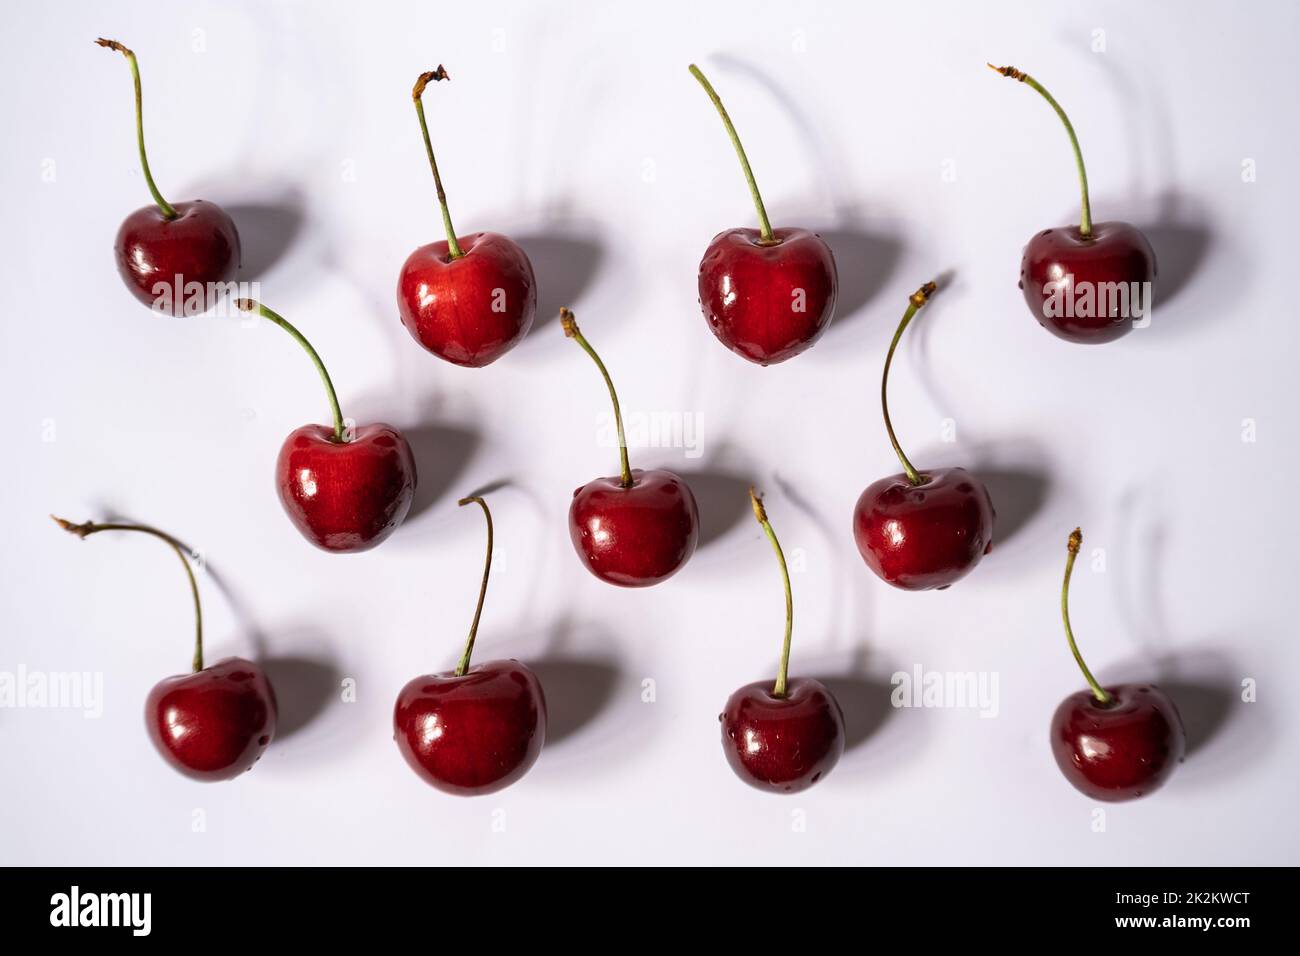 Cherries with a hard shadows side by side on a light background Stock Photo